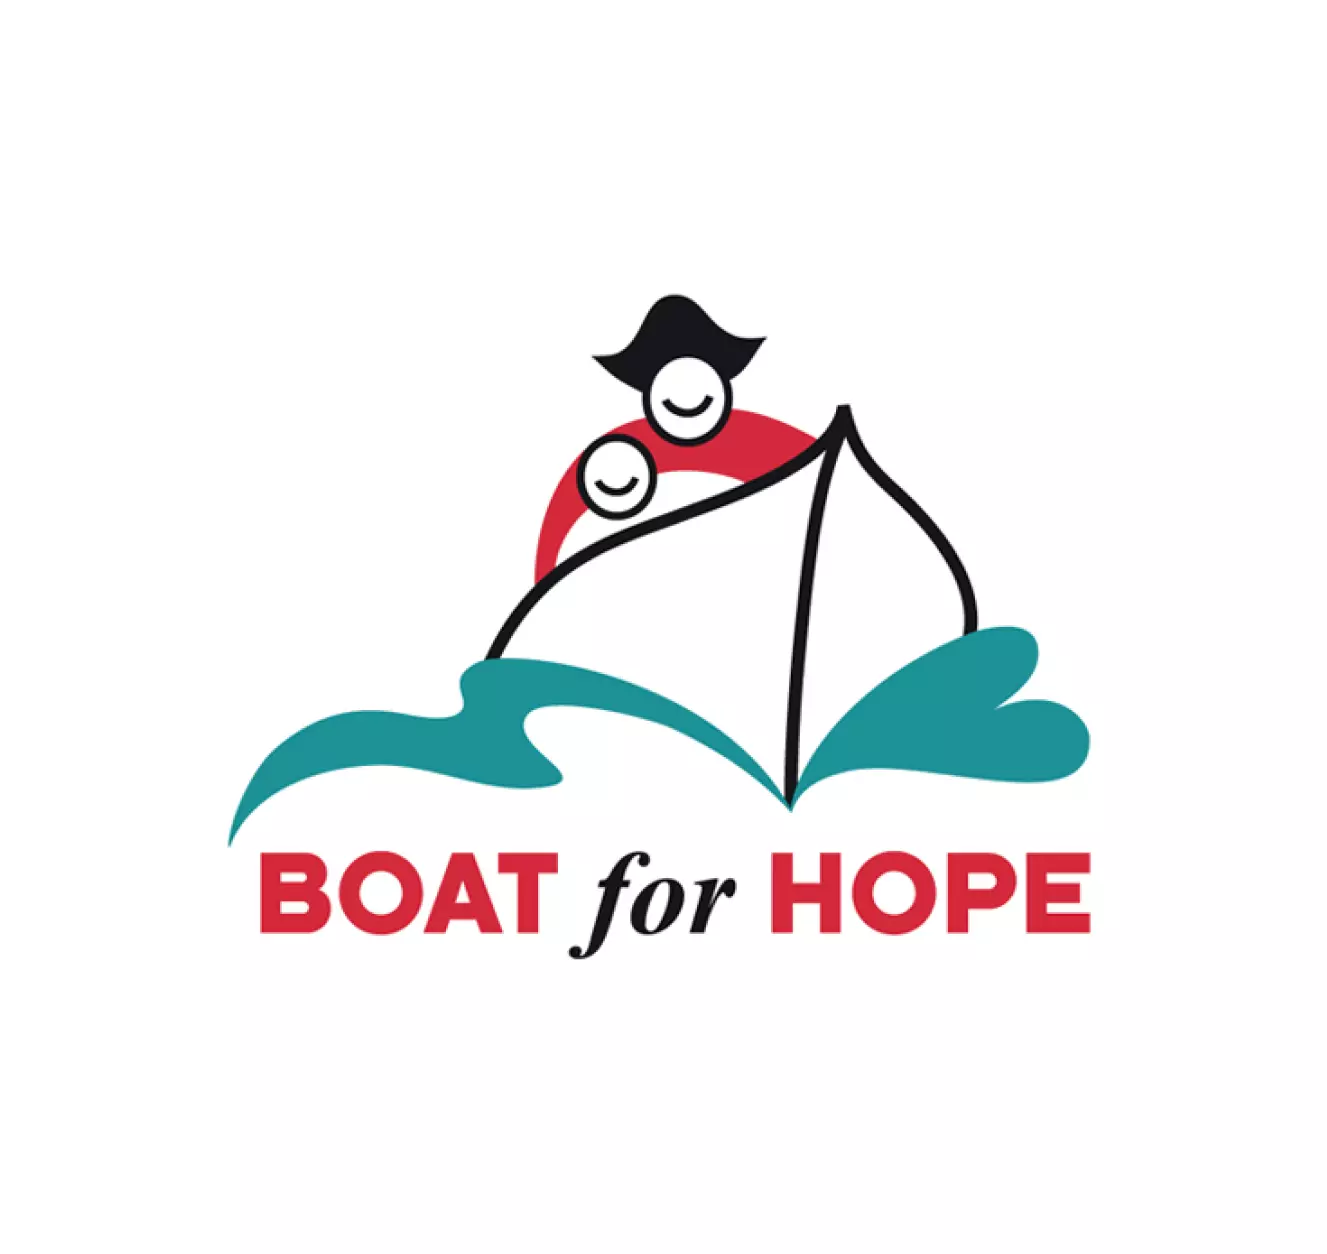 Boats-for-hope